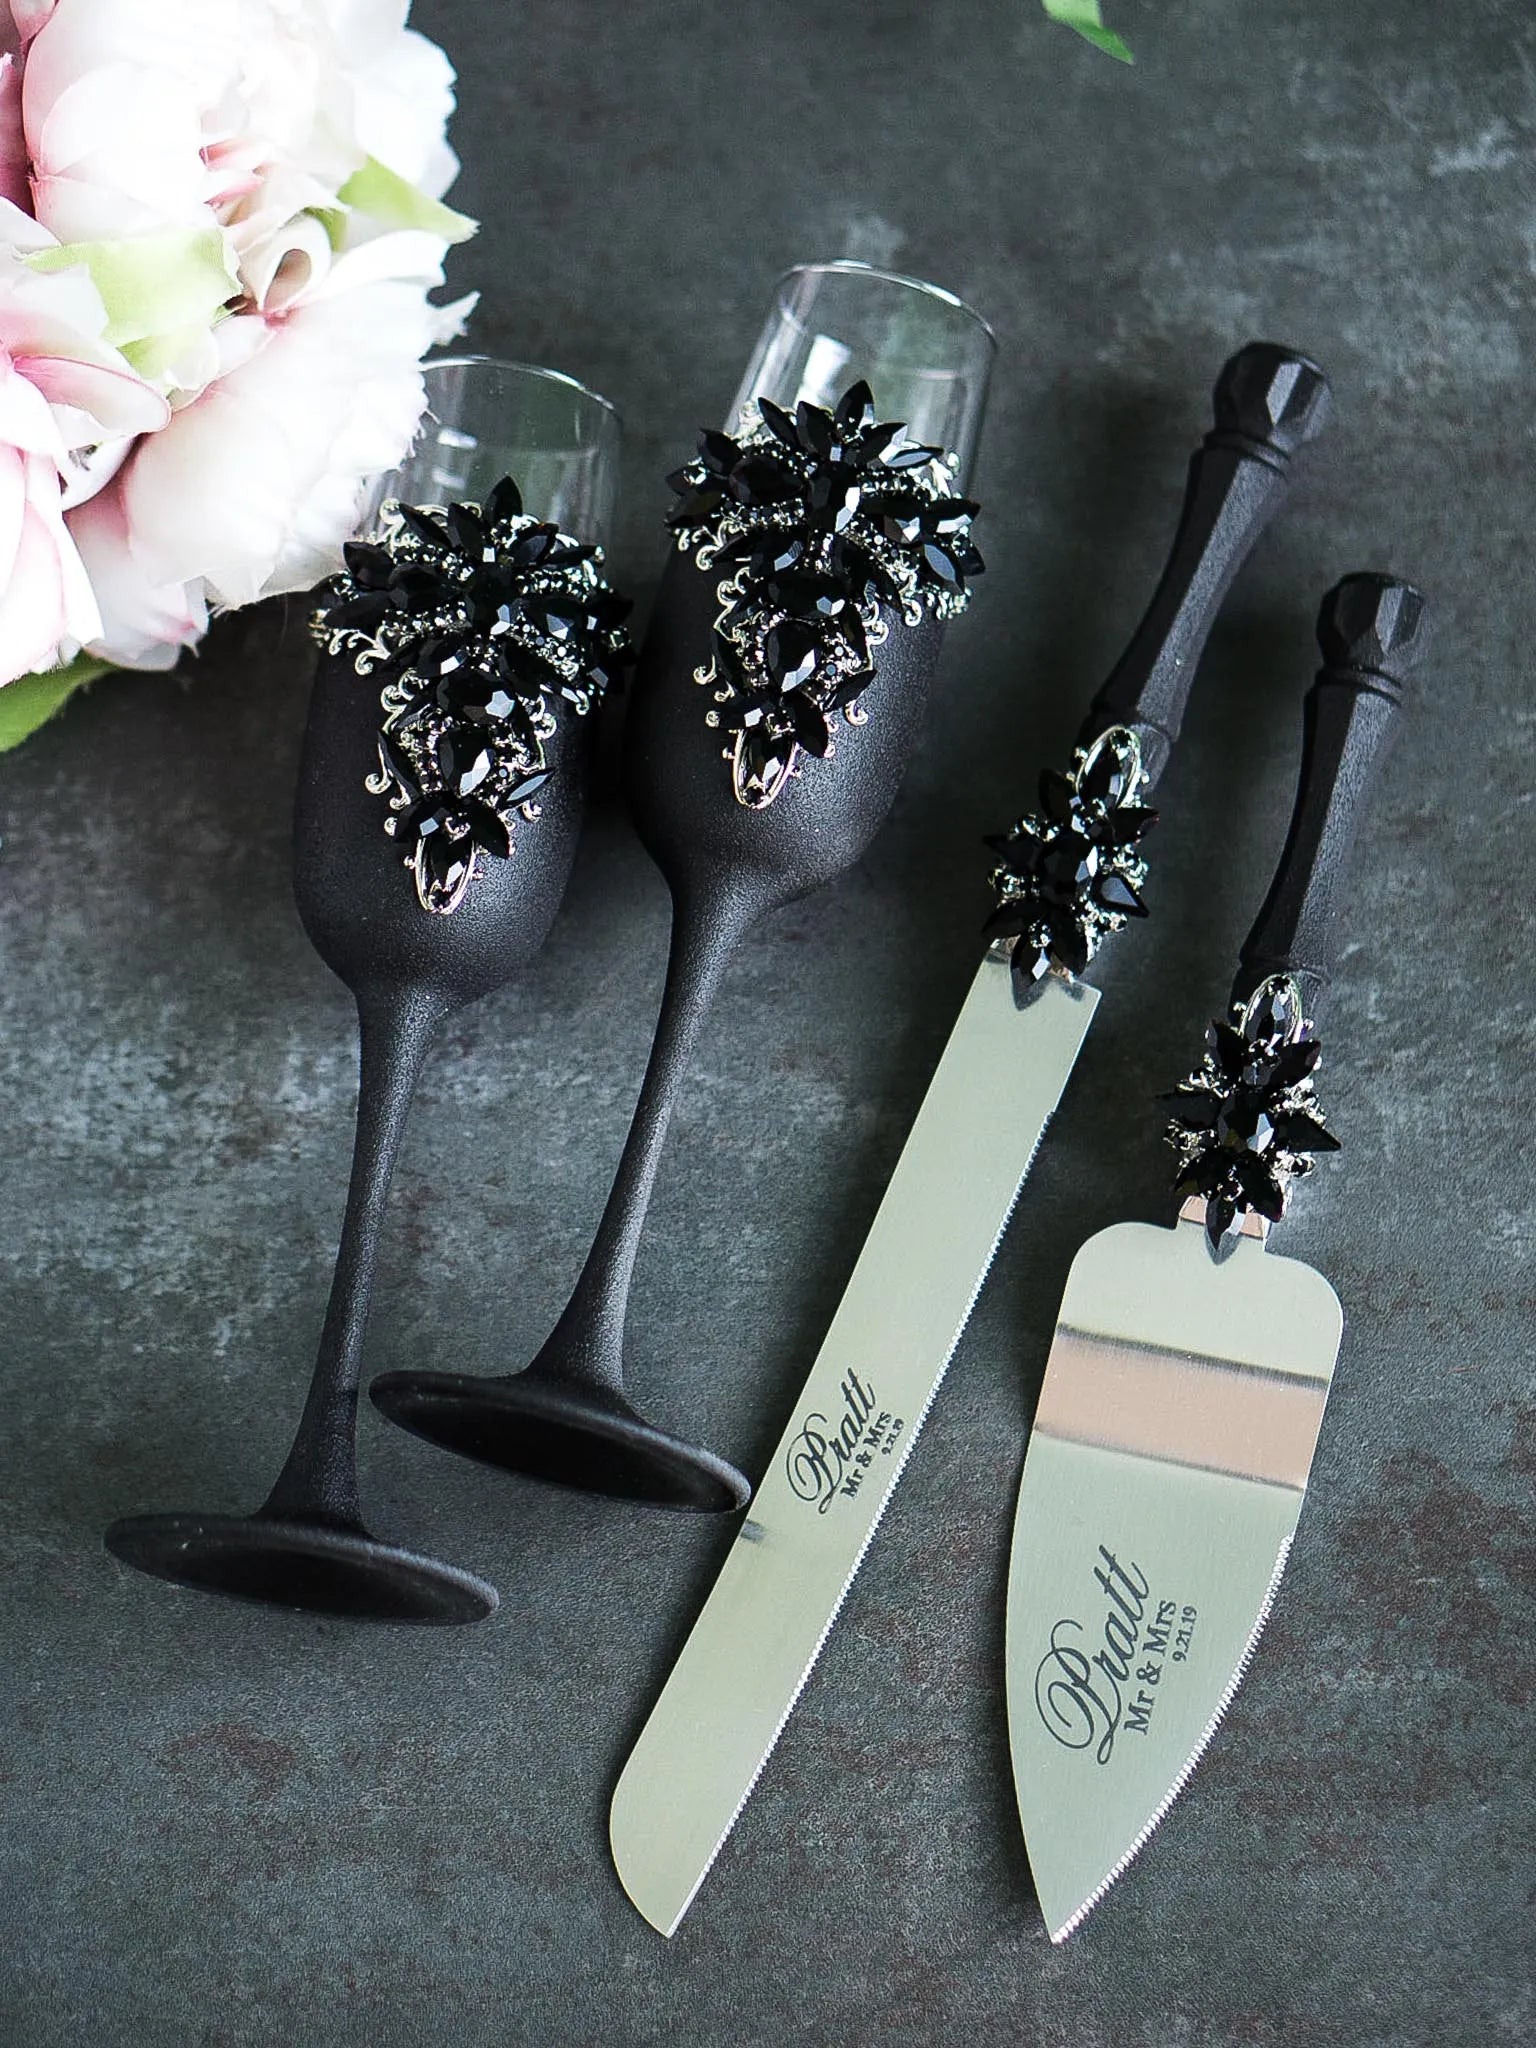 Unique wedding toast glasses with black crystal detailing